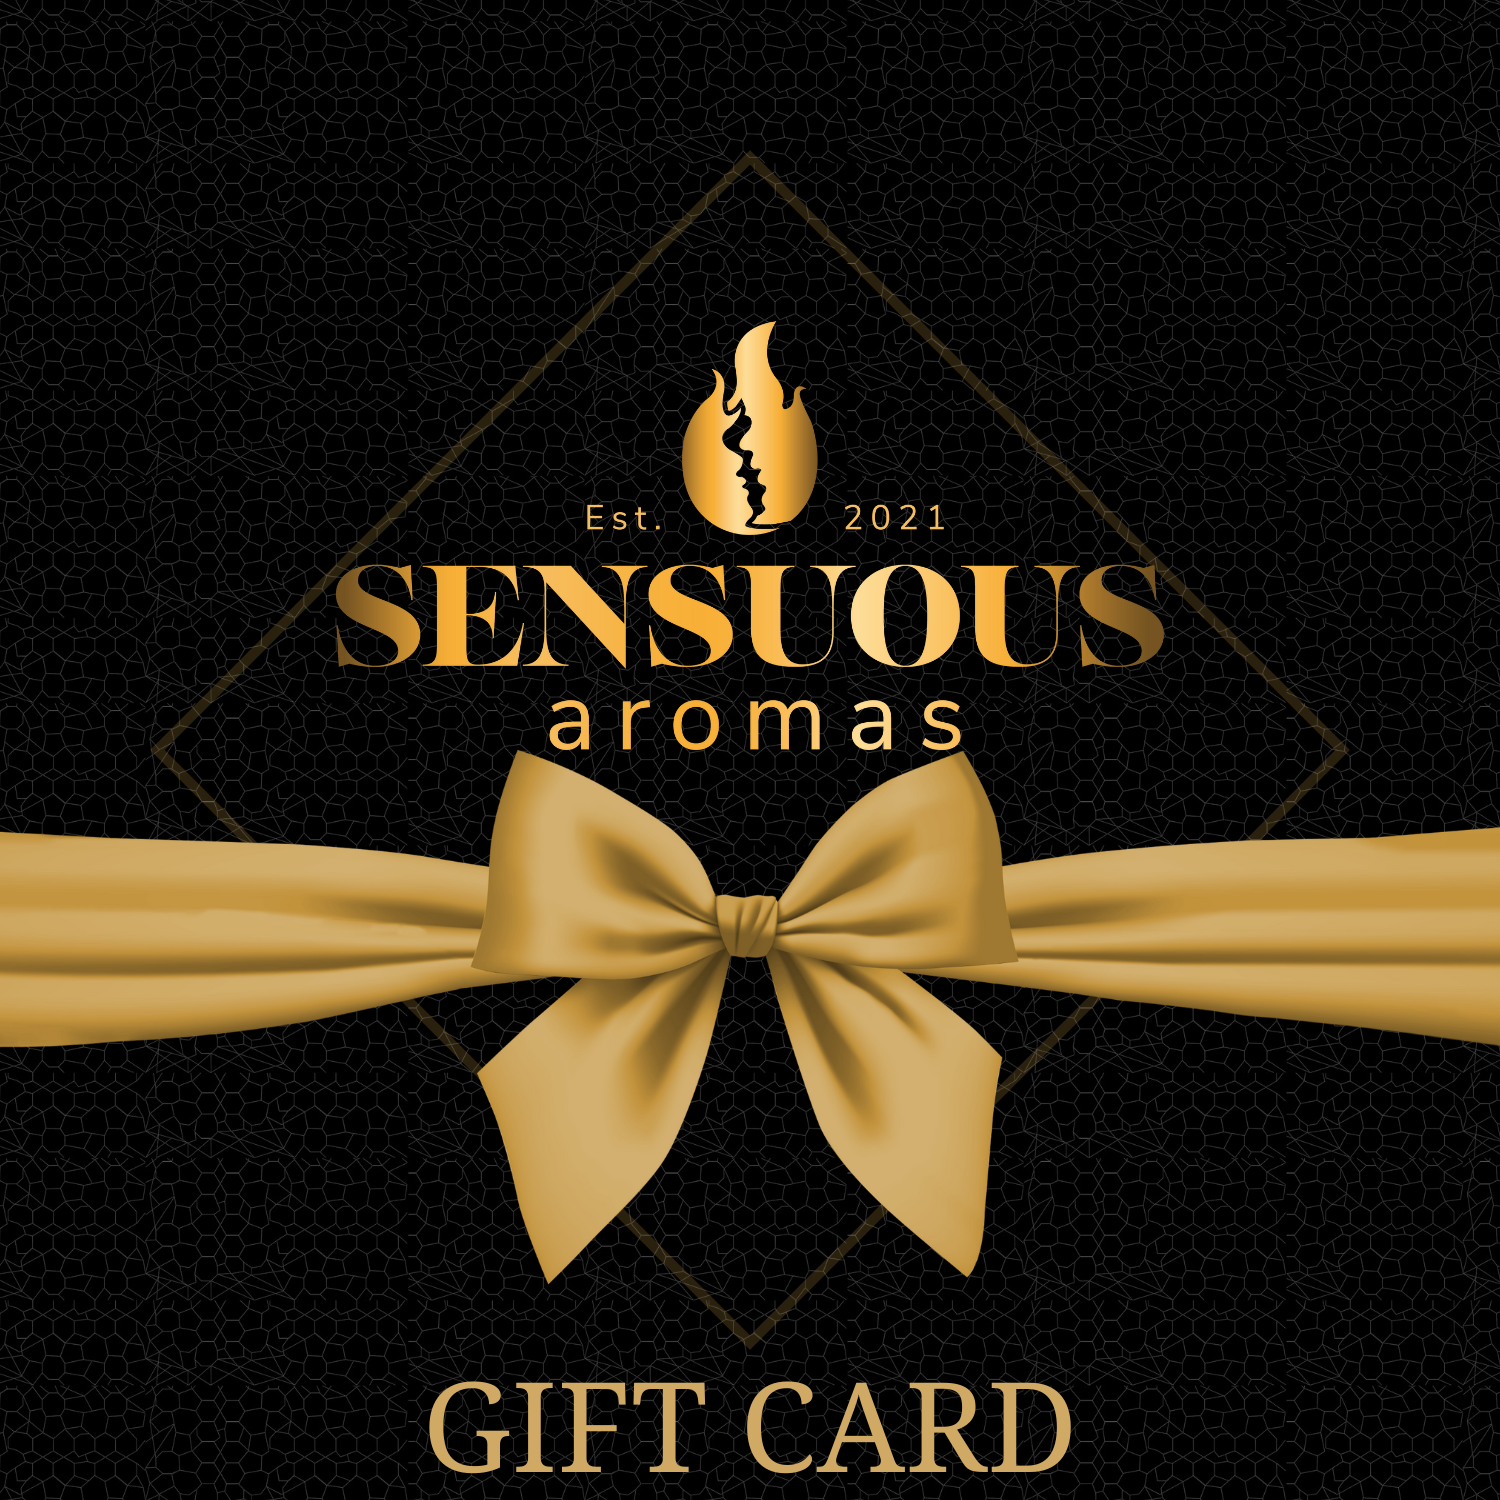 Digital gift cards allows them to choose the perfect fragrance for them.